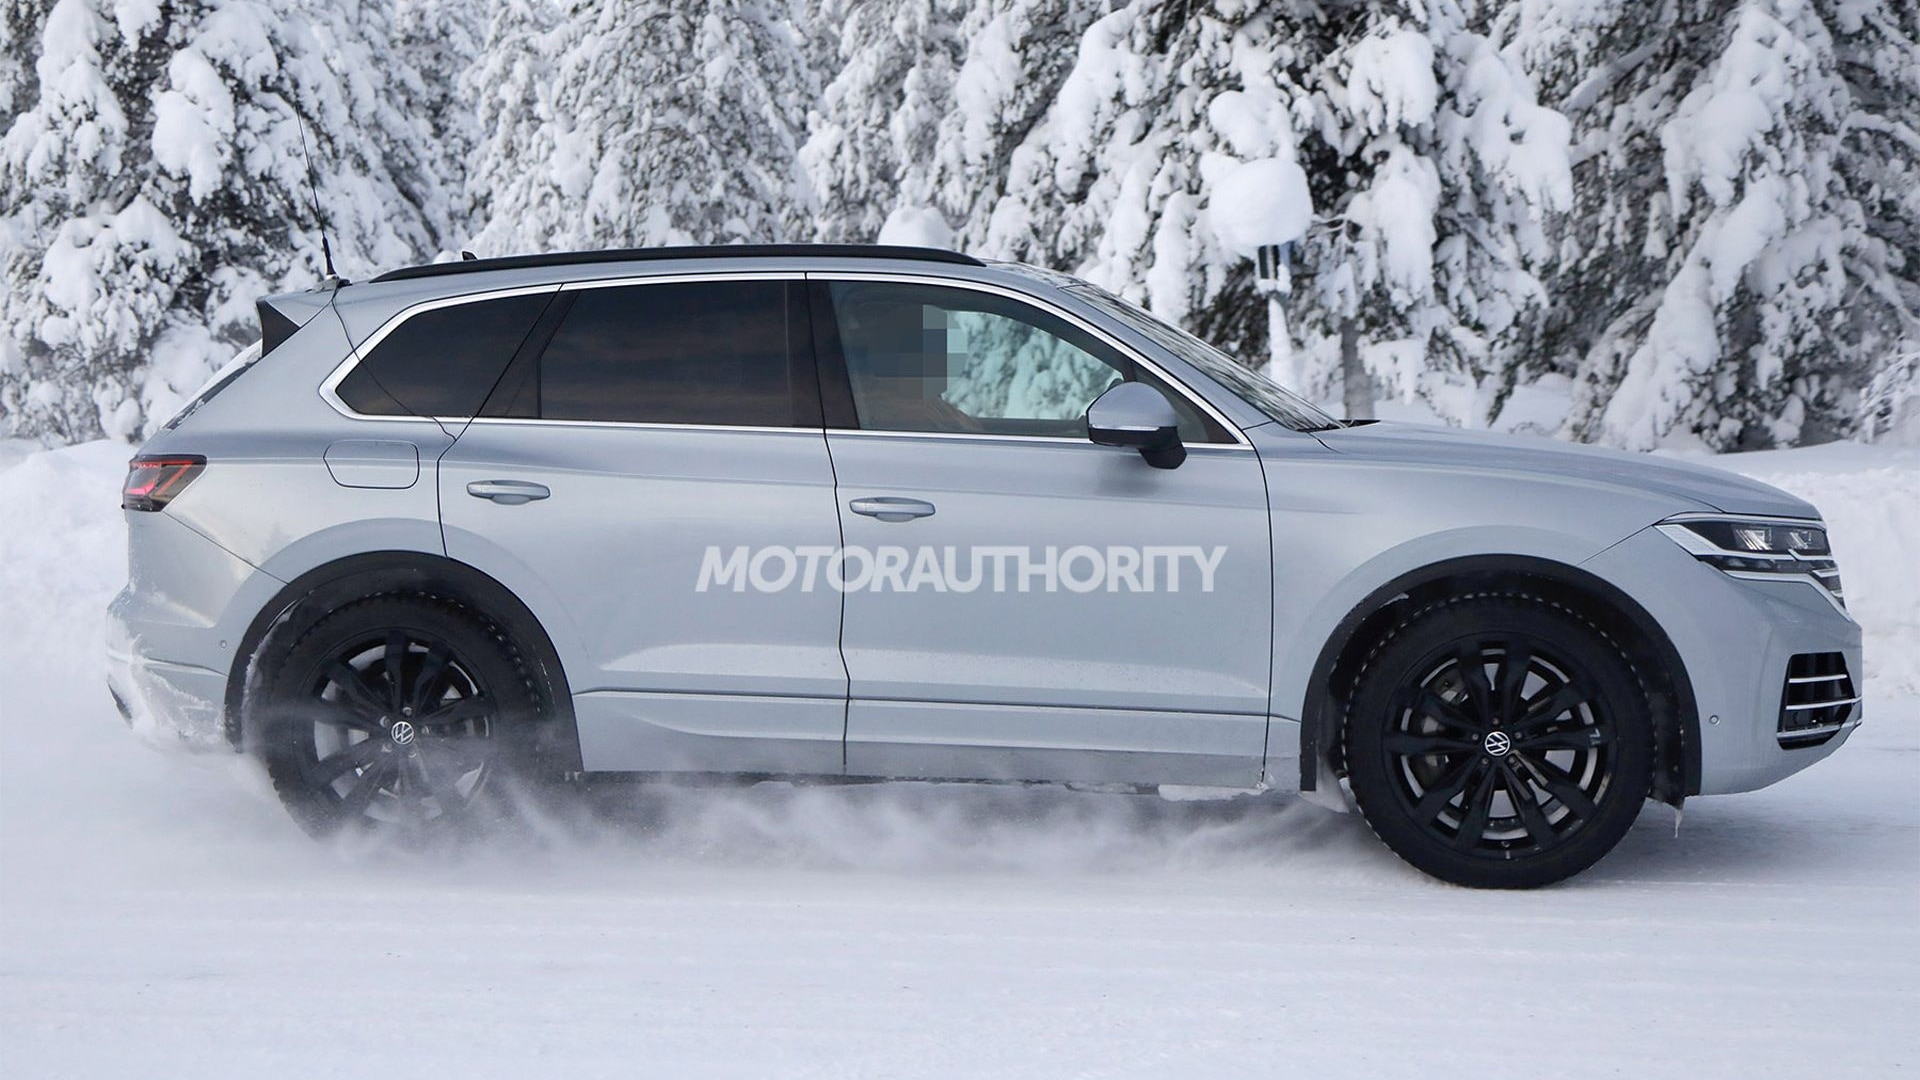 VW Touareg Facelift Rendering Tries To Peel Off Stickers From Spy Shots